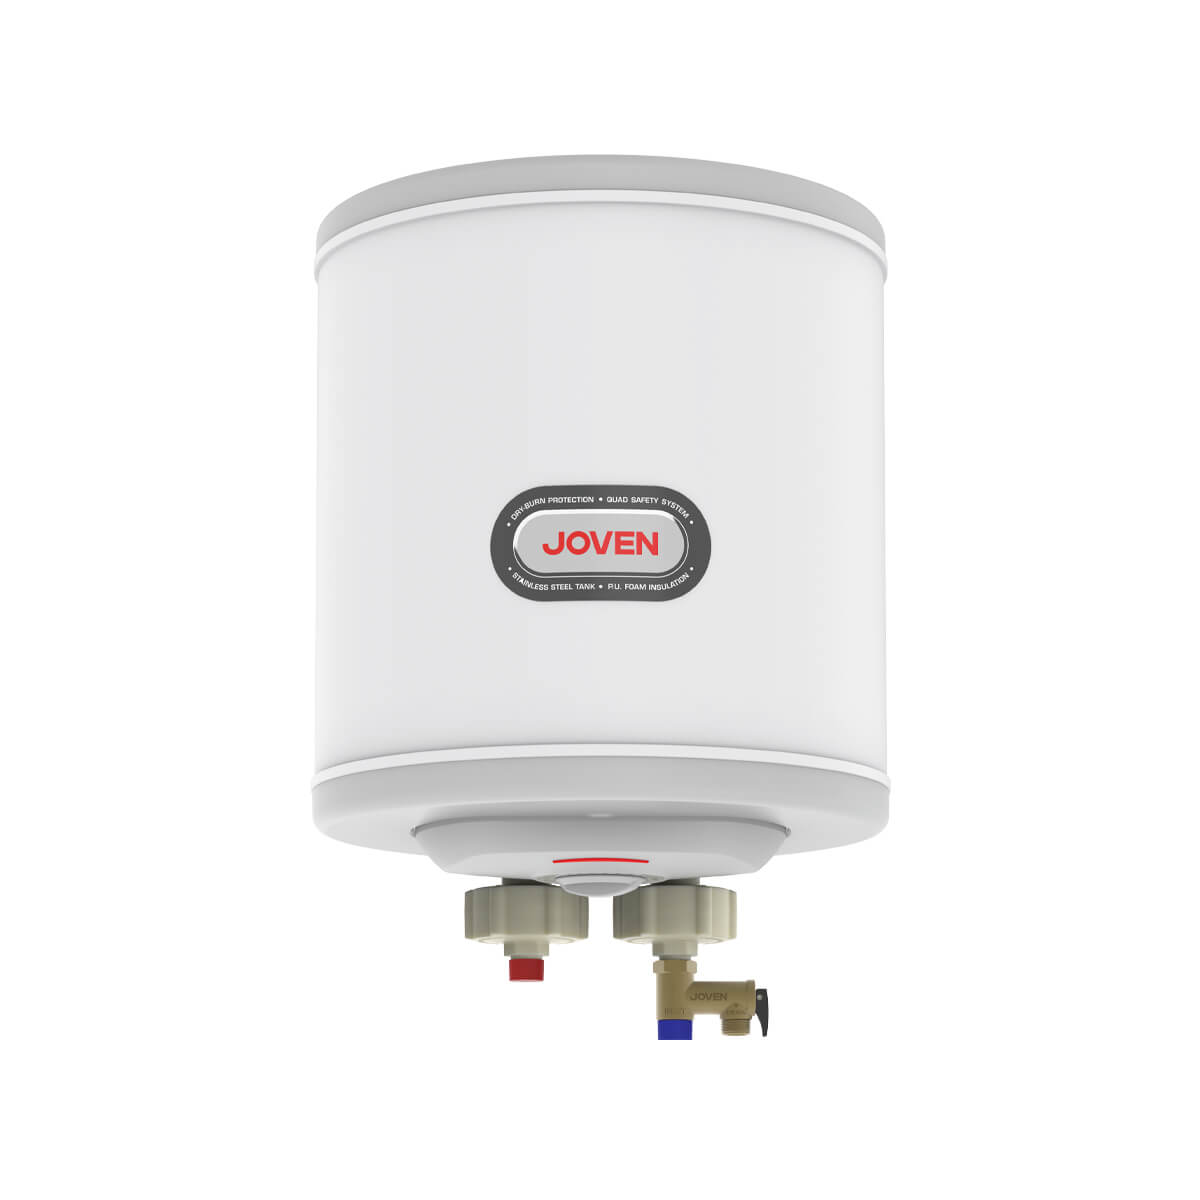 Joven Water Heater - Joven Storage Water Heater Tank with Isolation Barrier JSV25 - ShopJourney